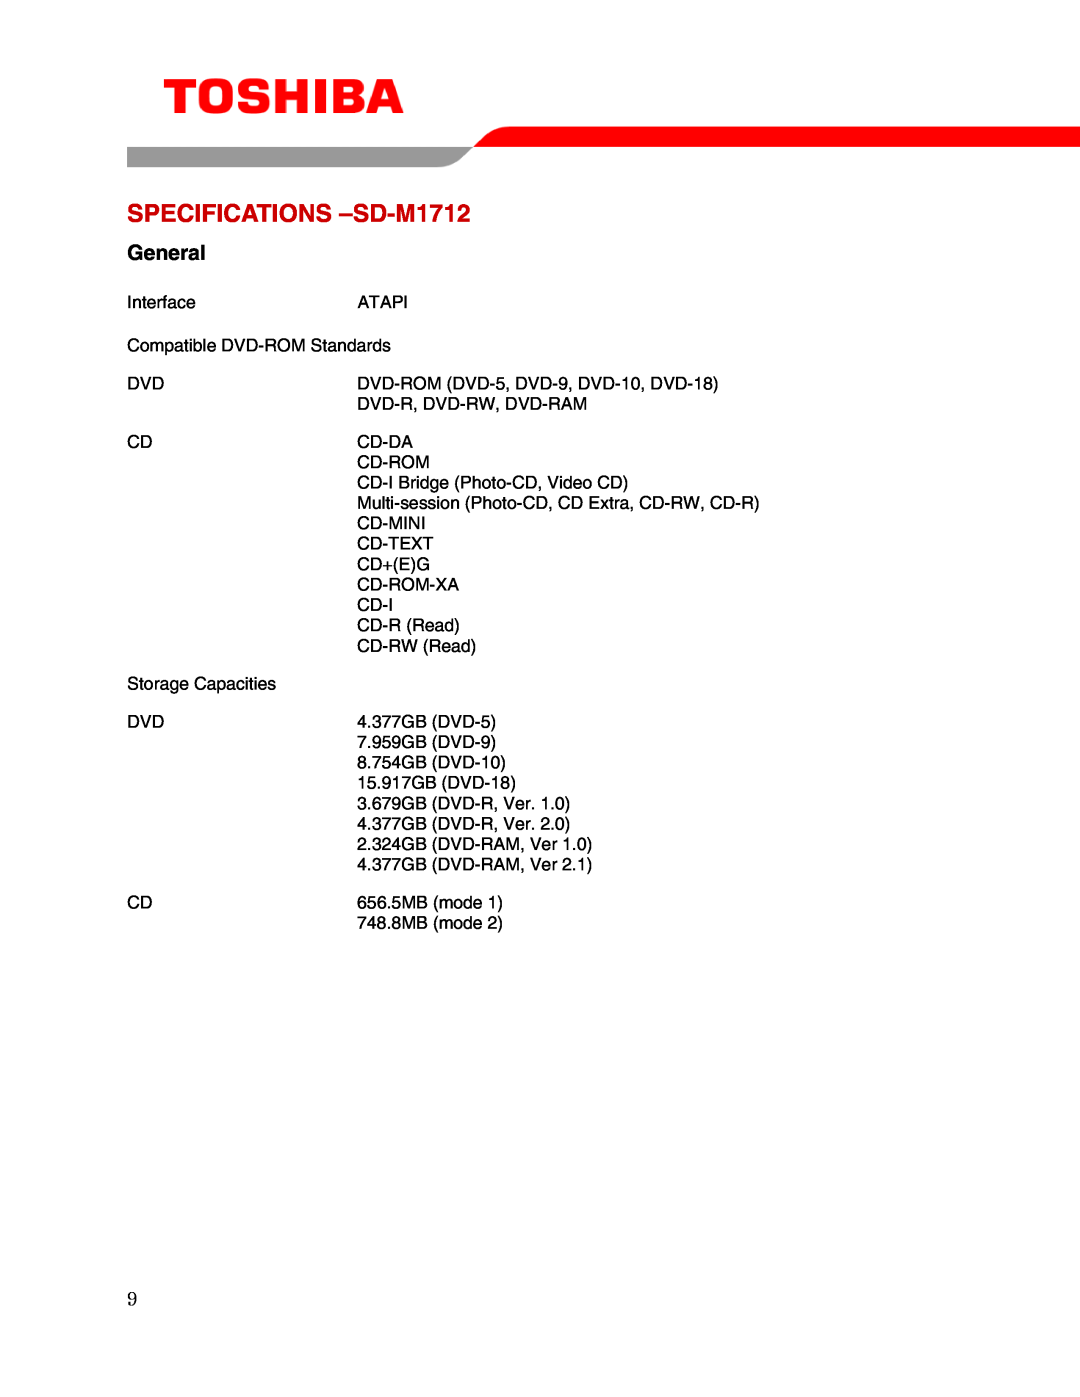 Toshiba user manual SPECIFICATIONS -SD-M1712, General 